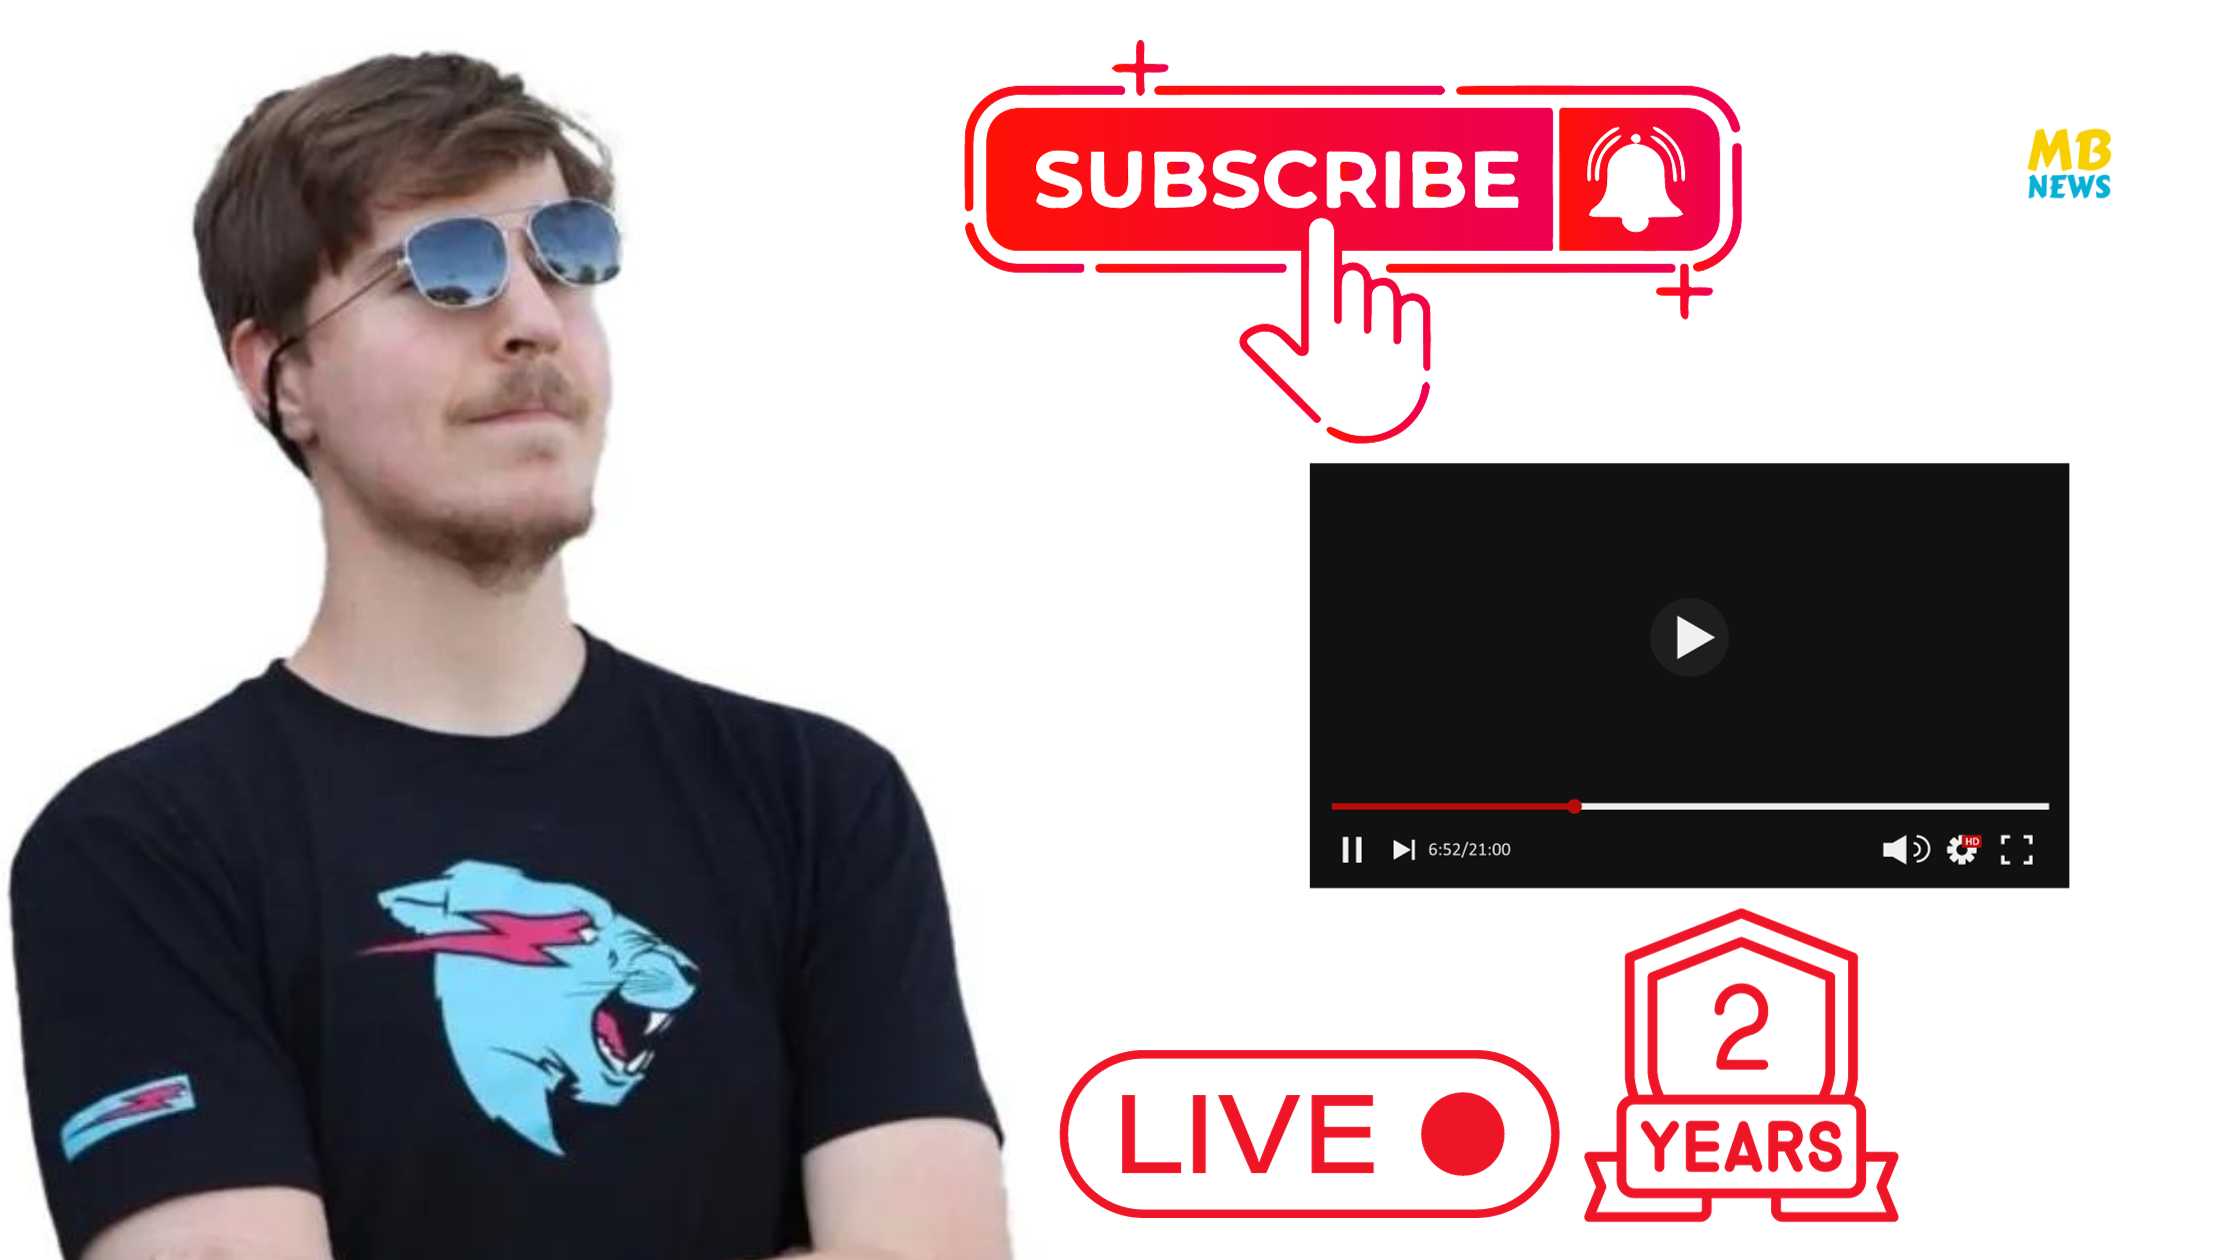 MrBeast's Remarkable Subscribers Prediction Video Set to Go Live in Two Years!